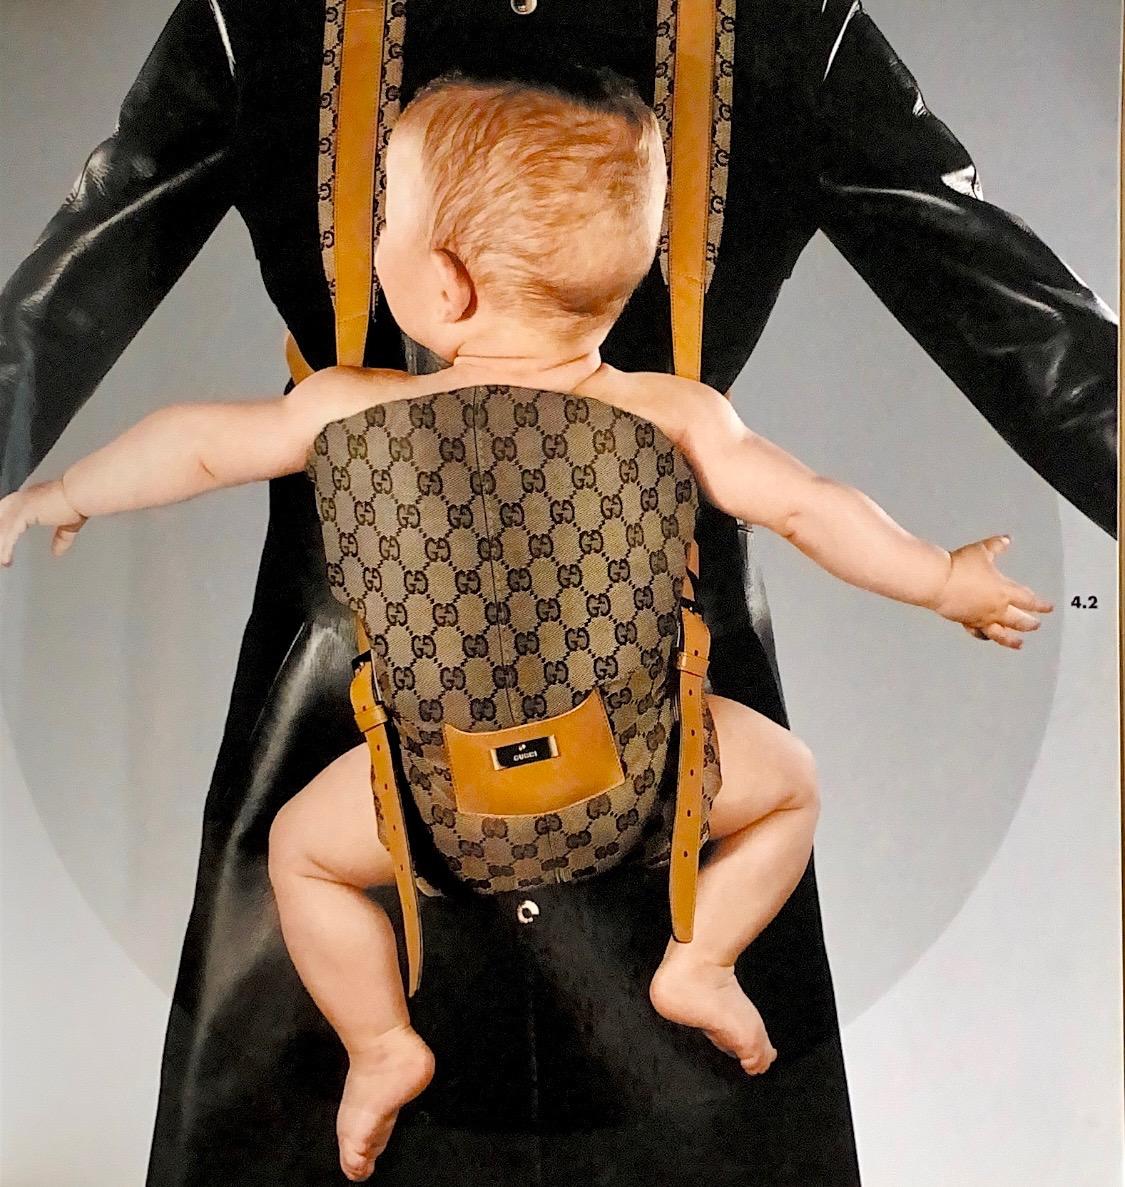 Presenting a rare baby carrier designed by Tom Ford for Gucci, released as part of the Fall/Winter 2000 collection. Silverplated buckle closures at the front and clips in the back make this piece easily adjustable. The black-on-black woven GG